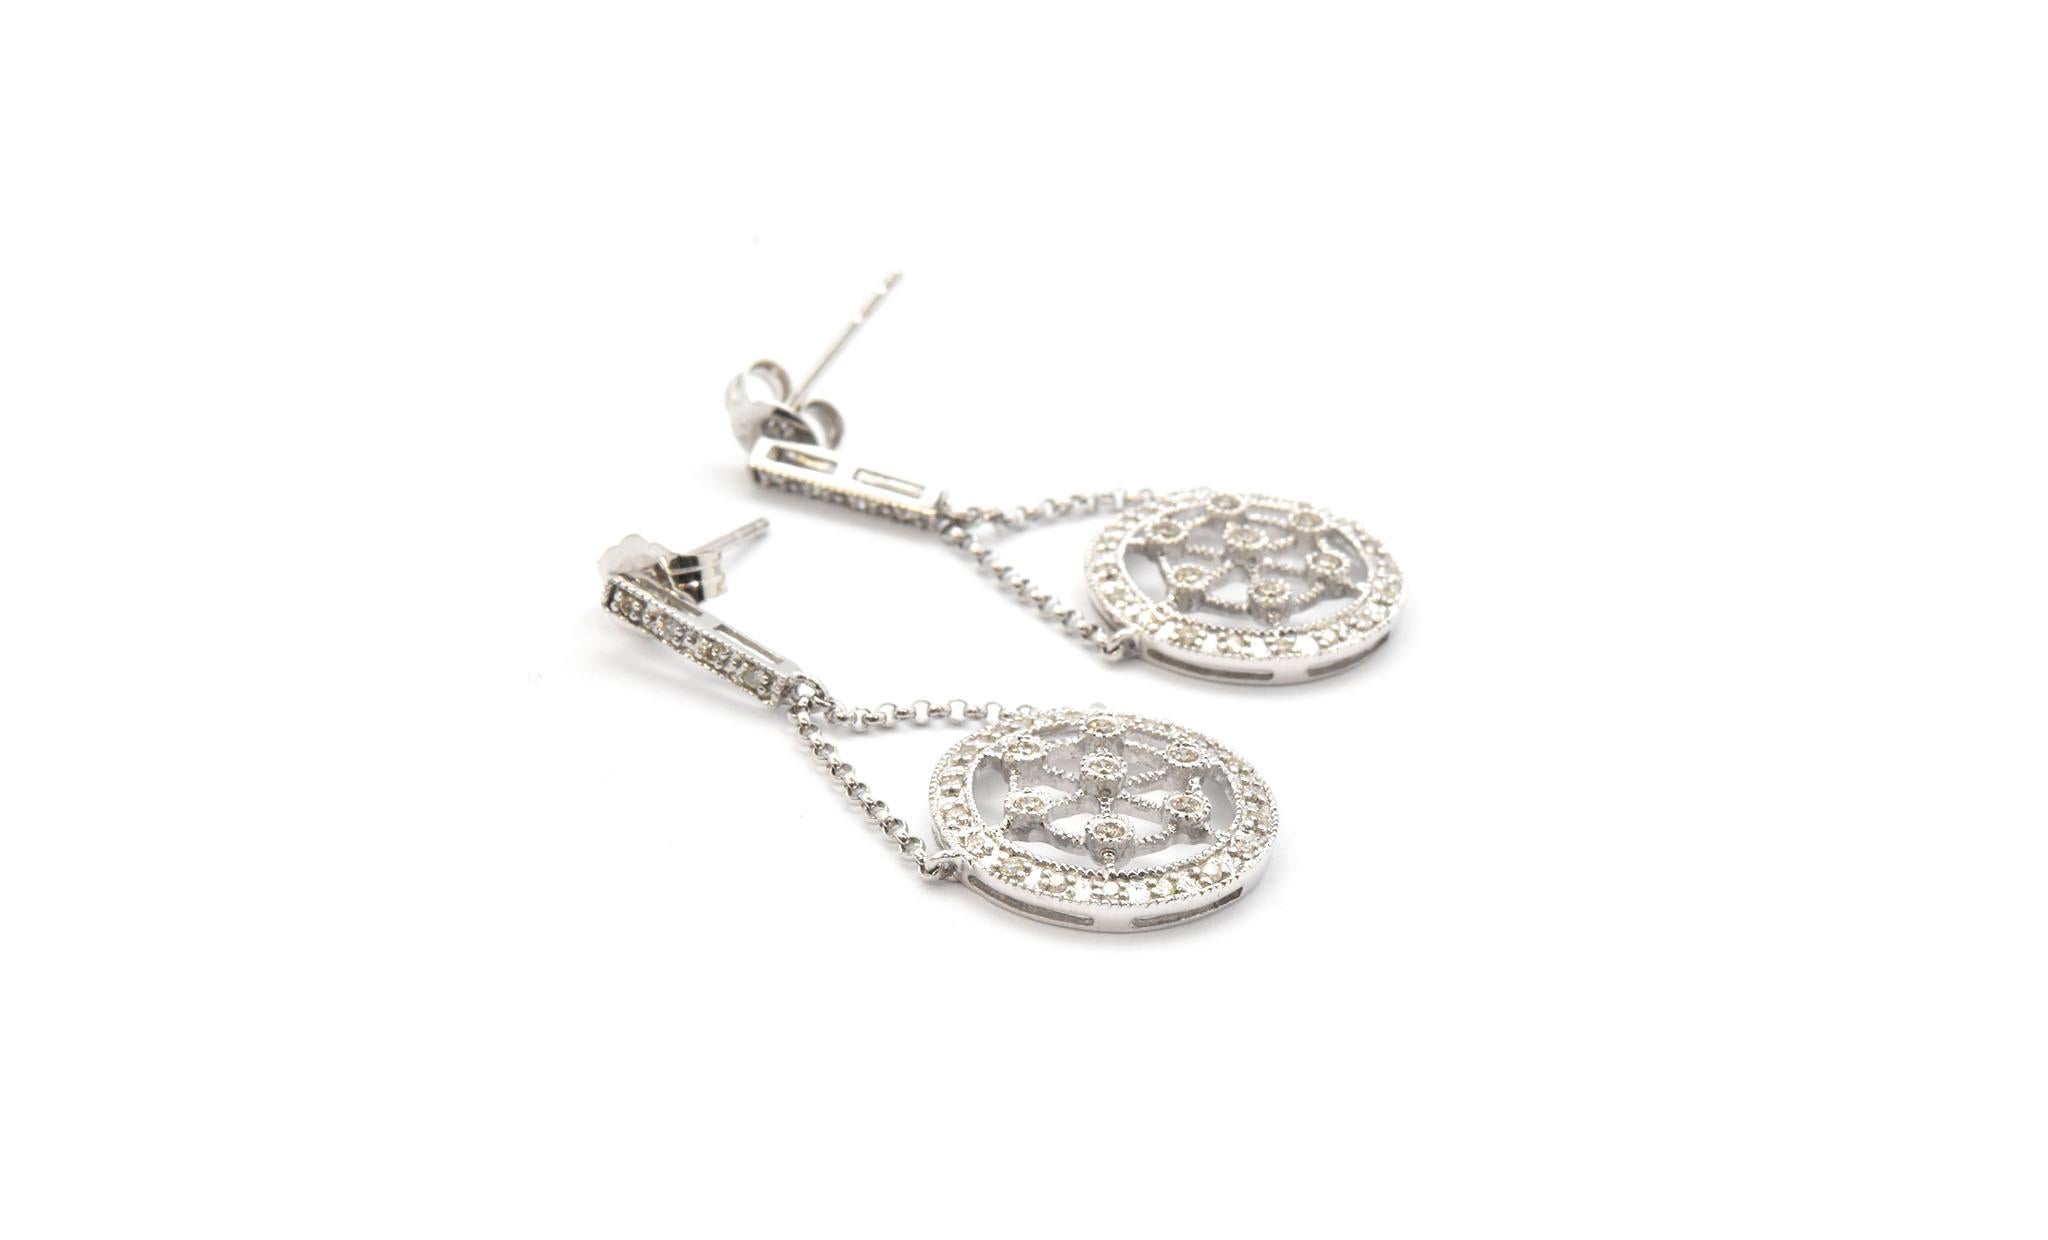 This pair of dangling earrings are fashioned from 14k white gold and set with 60 round diamonds! The circles dangle from the white gold straight diamond line on circle links, the dangle is 12.66mm. Attached to the circle links is an 14k white gold